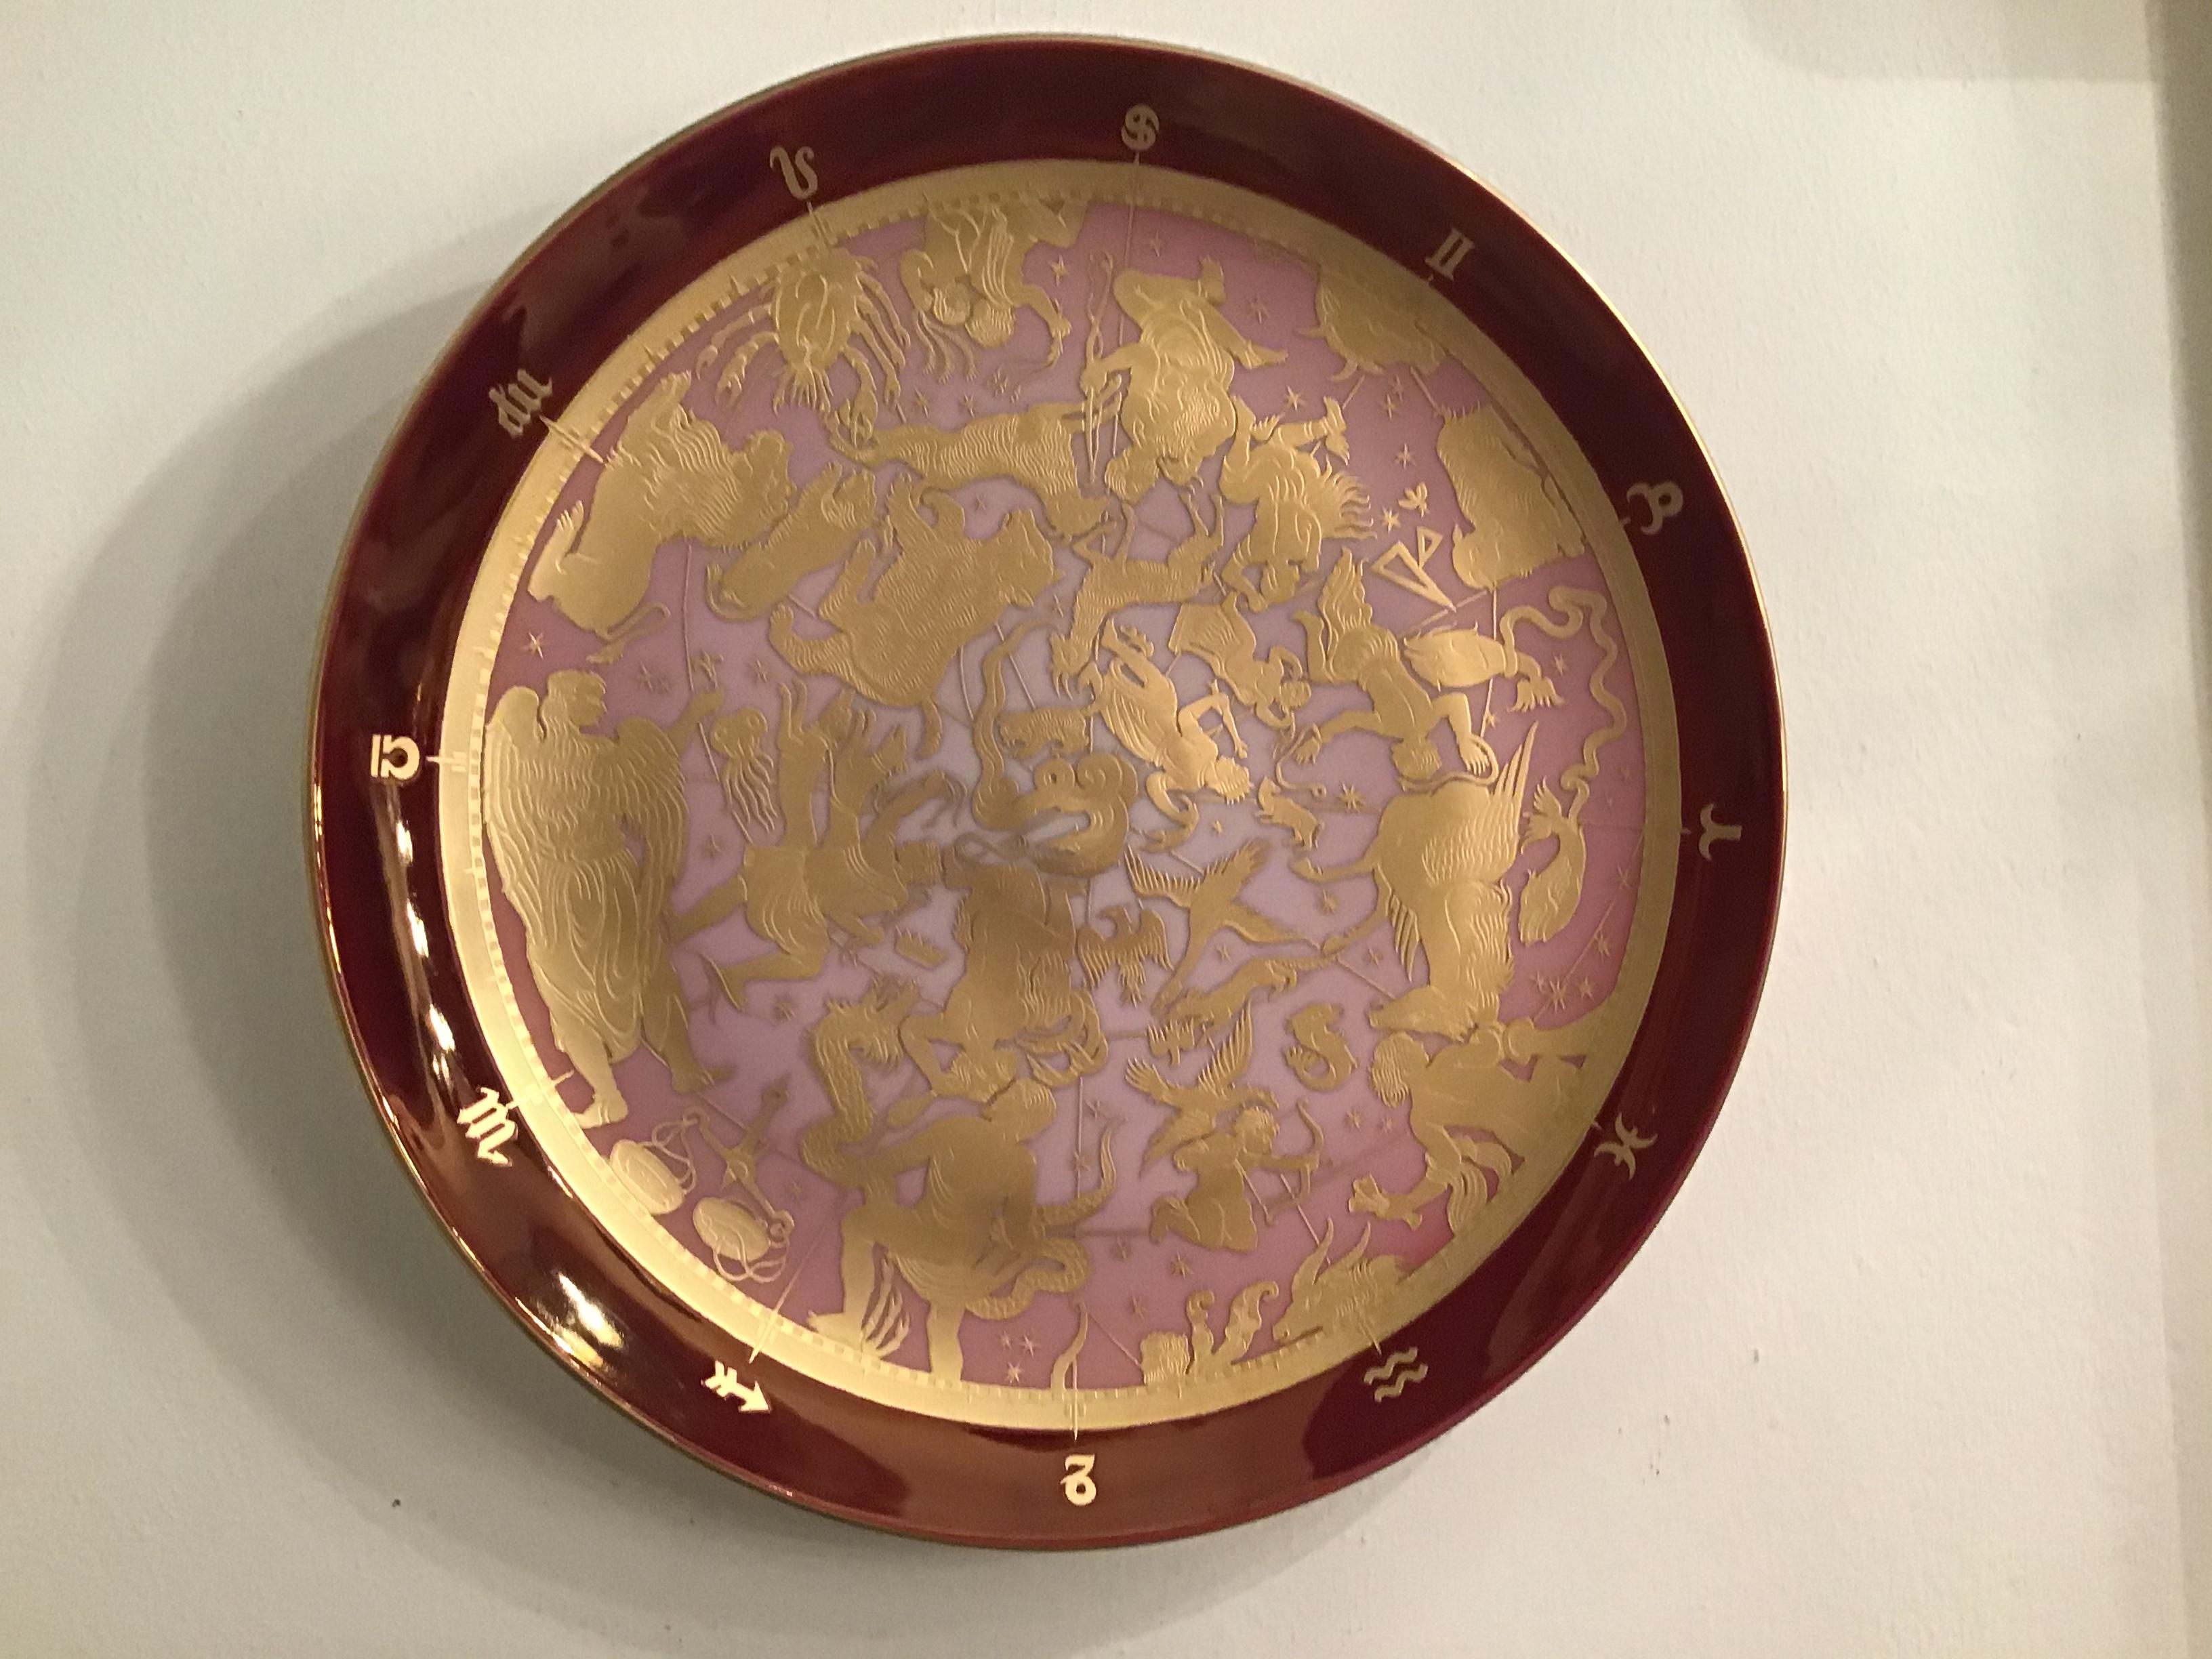 Morbelli Porcelain Wall Plate “Planisfero Celeste” Worked with Pure Gold 1960 It For Sale 3